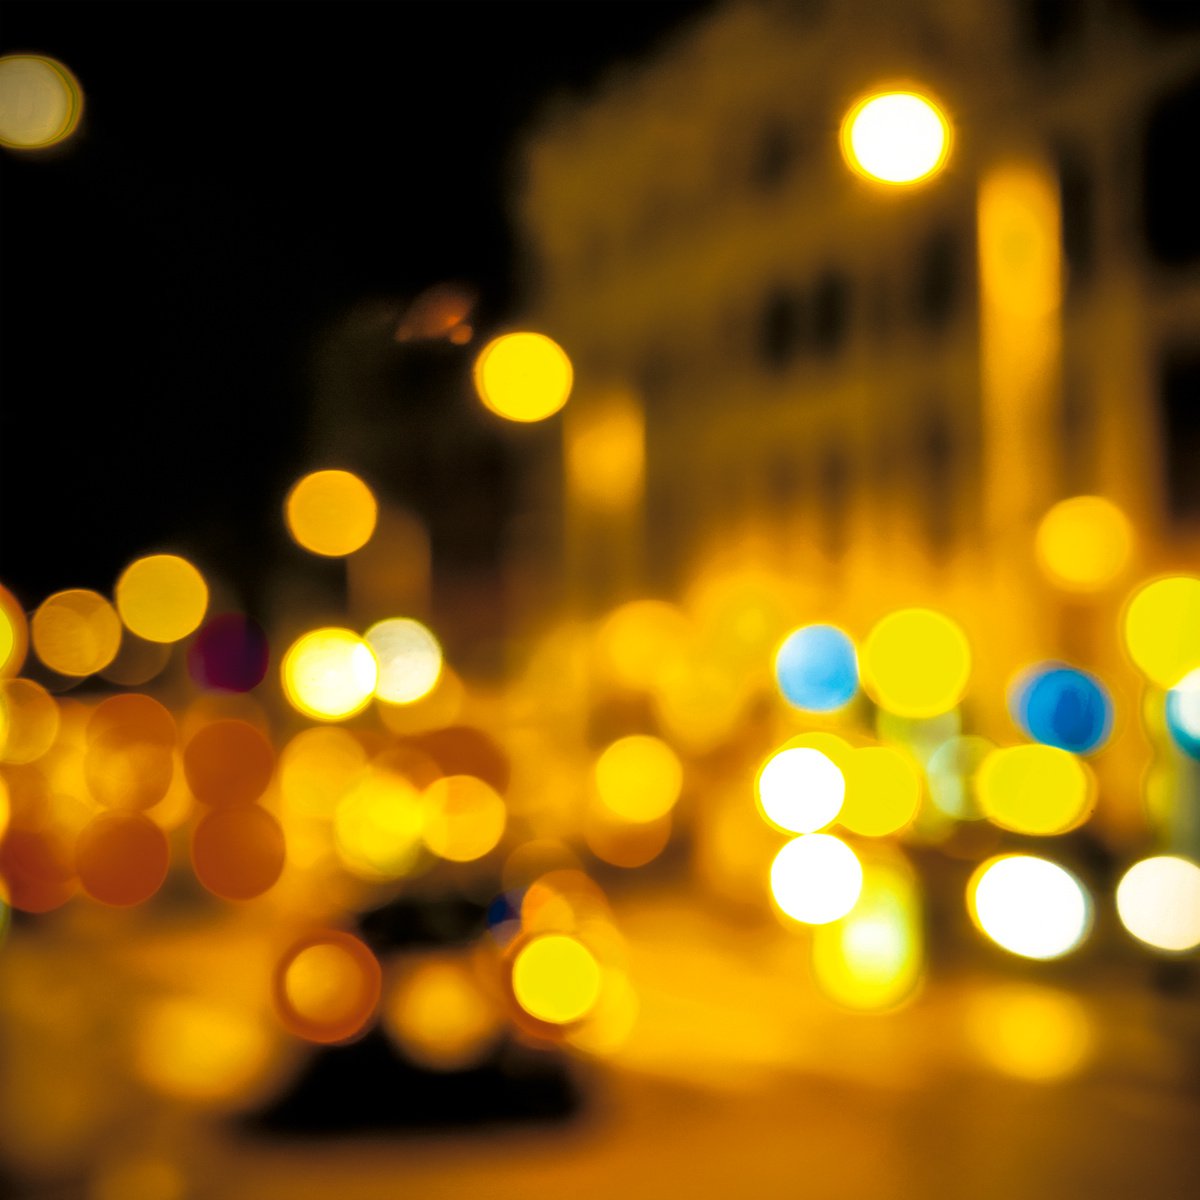 City Lights 15. Limited Edition Abstract Photograph Print #1/15. Nighttime abstract photo... by Graham Briggs